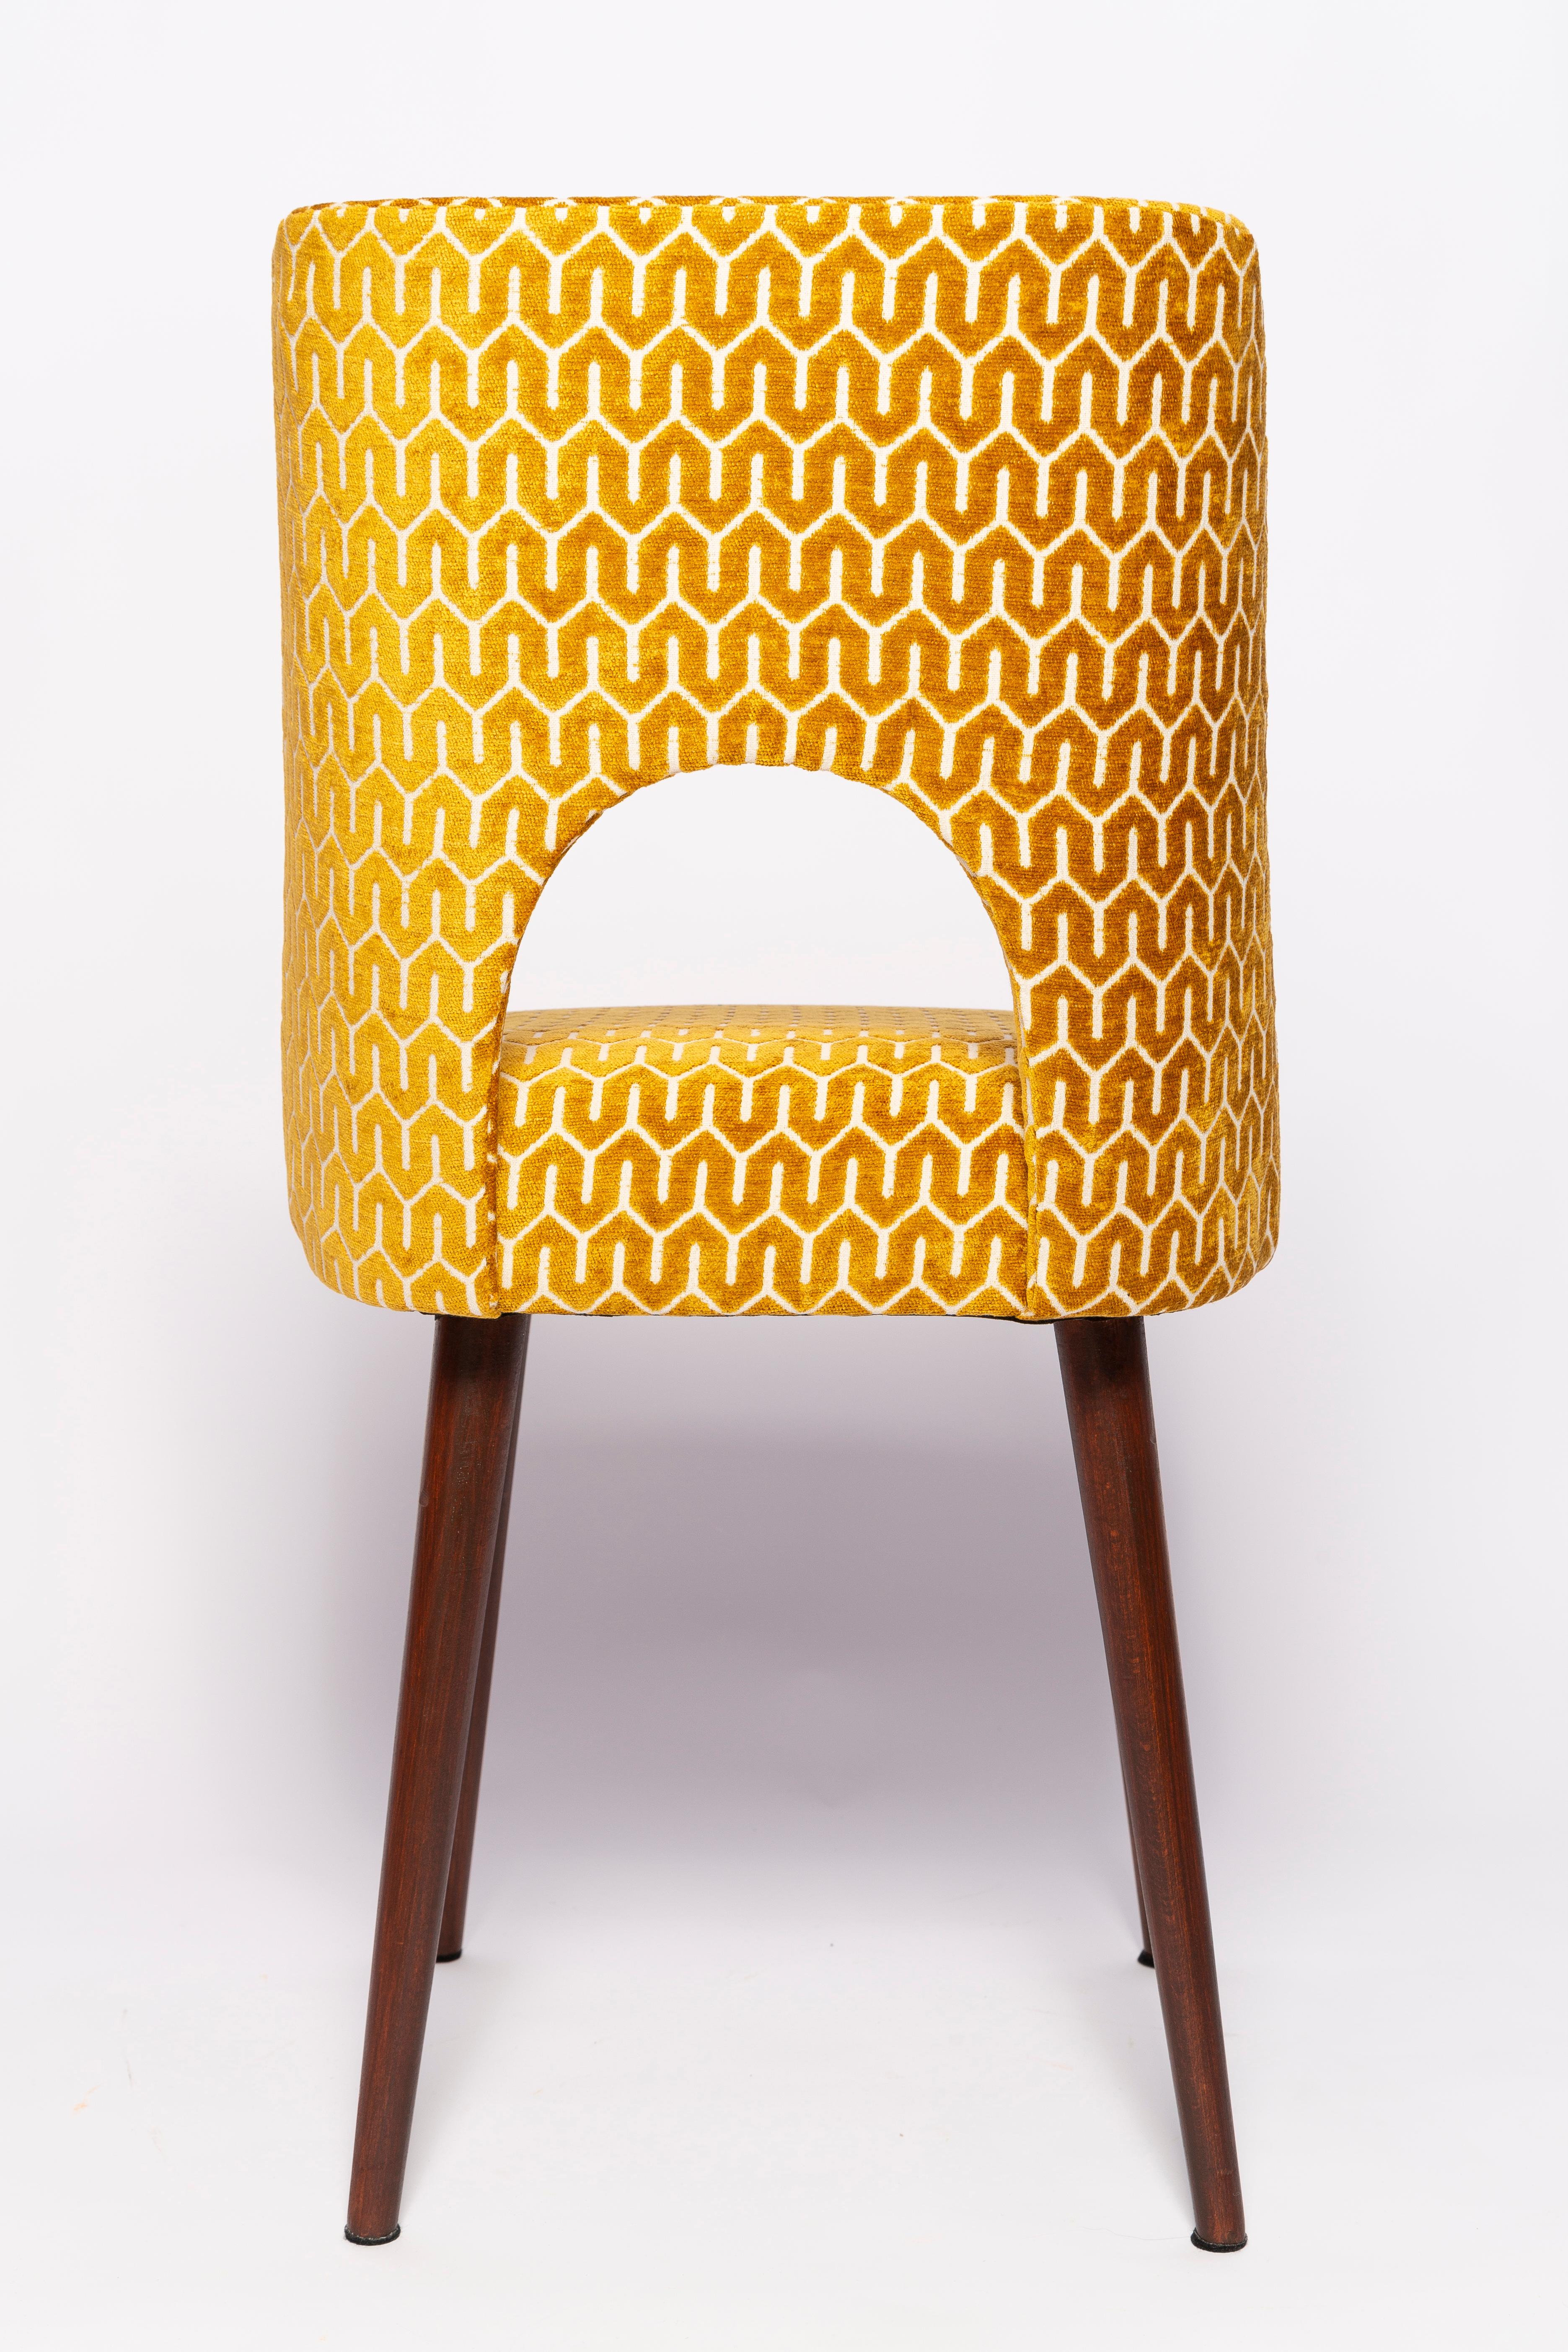 Hand-Crafted Mid-Century Yellow Mustard 'Shell' Chair, Europe, 1960s For Sale